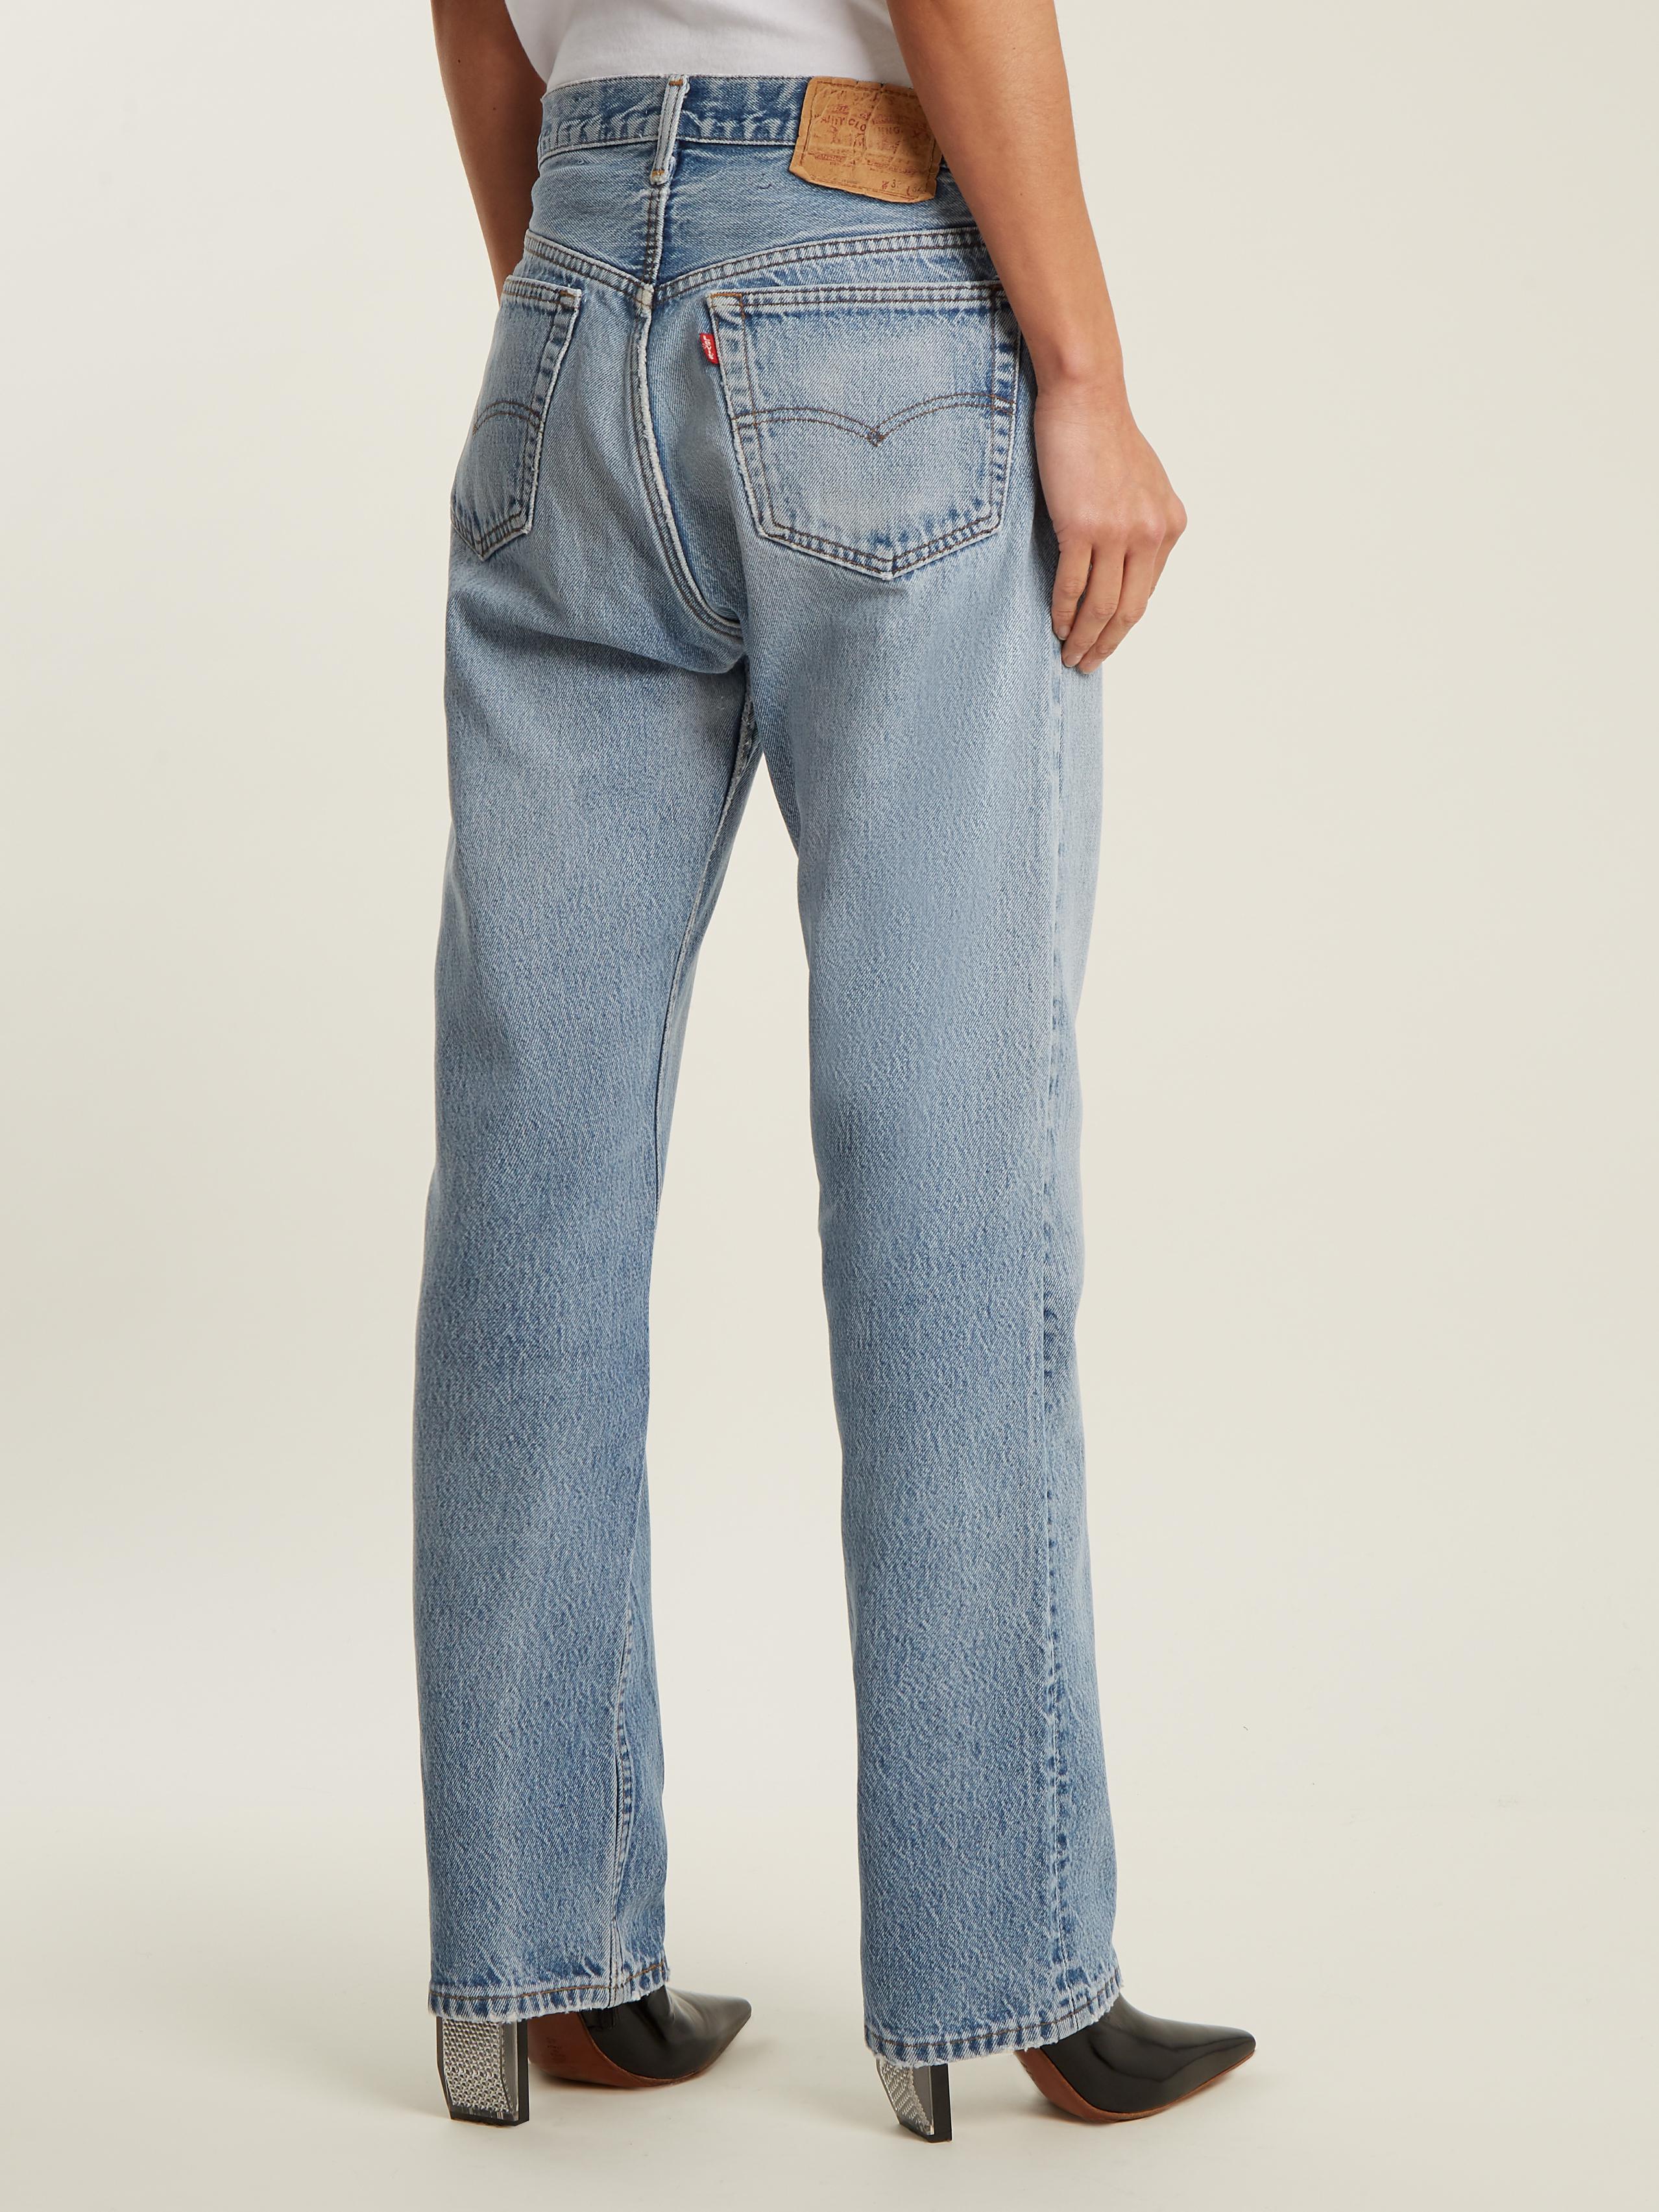 Vetements X Levi's Logo-embroidery Low-rise Wide-leg Jeans in Blue | Lyst